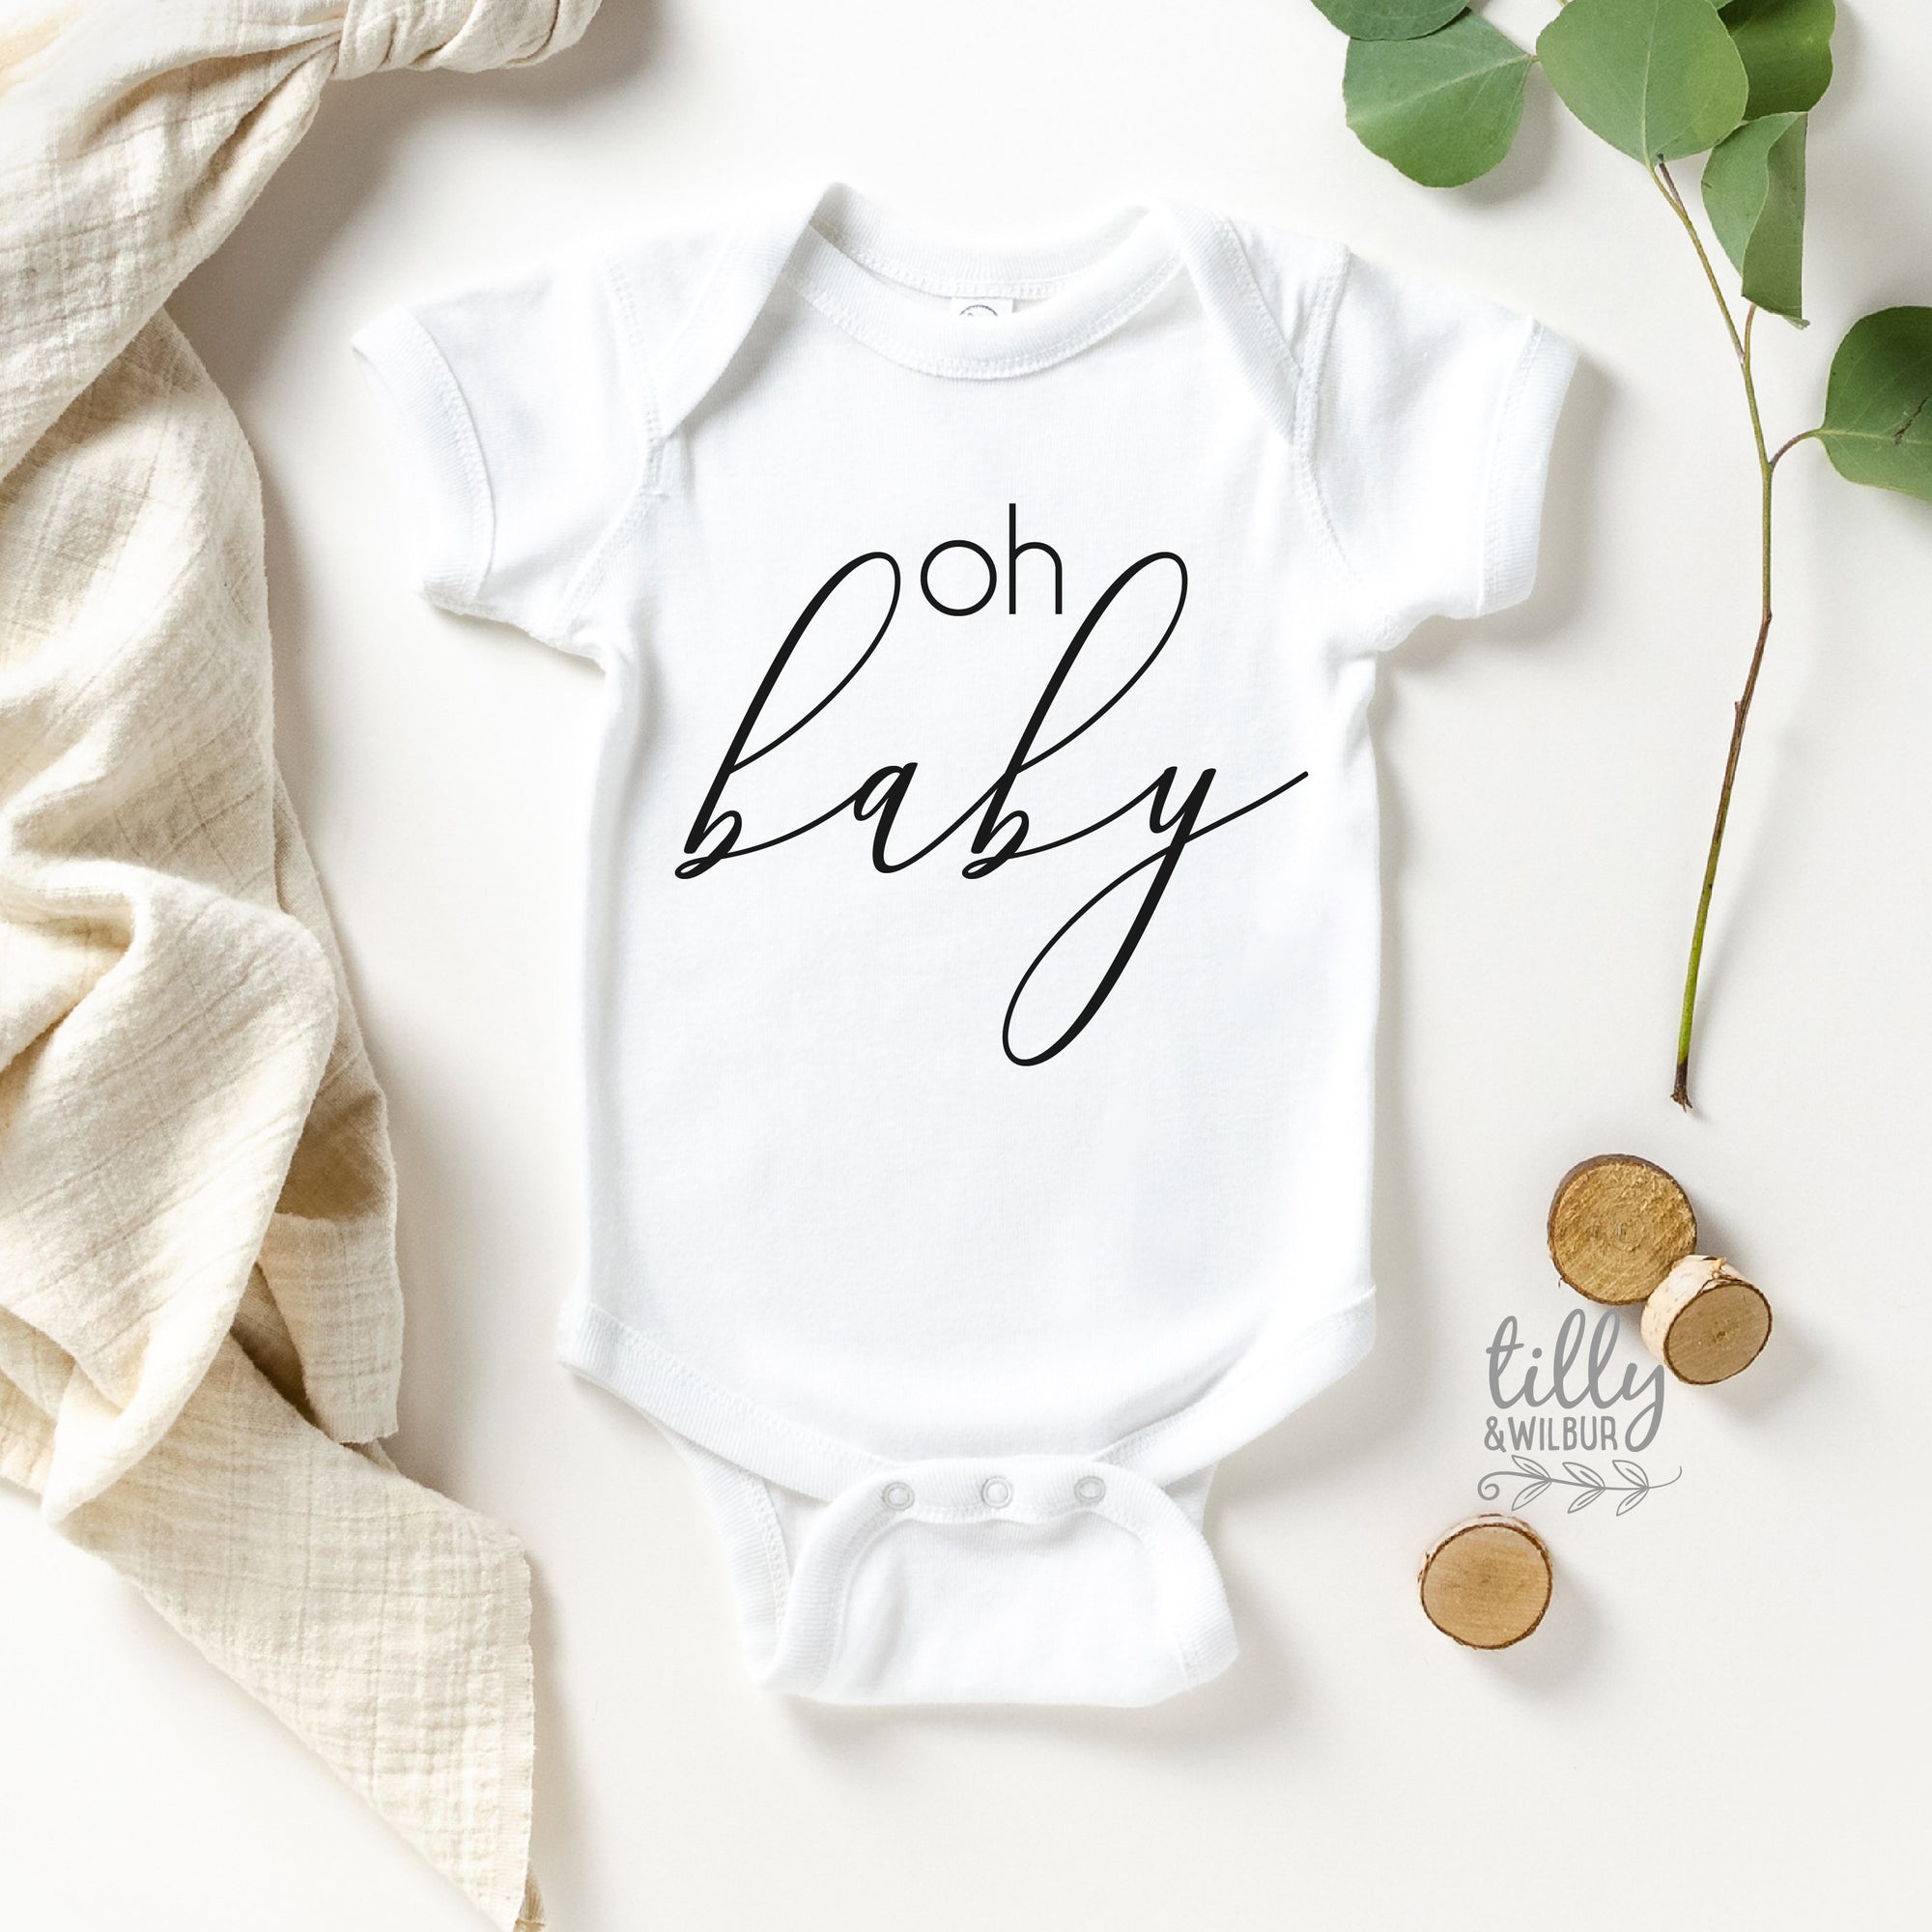 Oh Baby Pregnancy Announcement Bodysuit, Announcement Romper, Maternity Photo Prop, Baby Reveal, Baby Shower Gift, Newborn Baby Gift